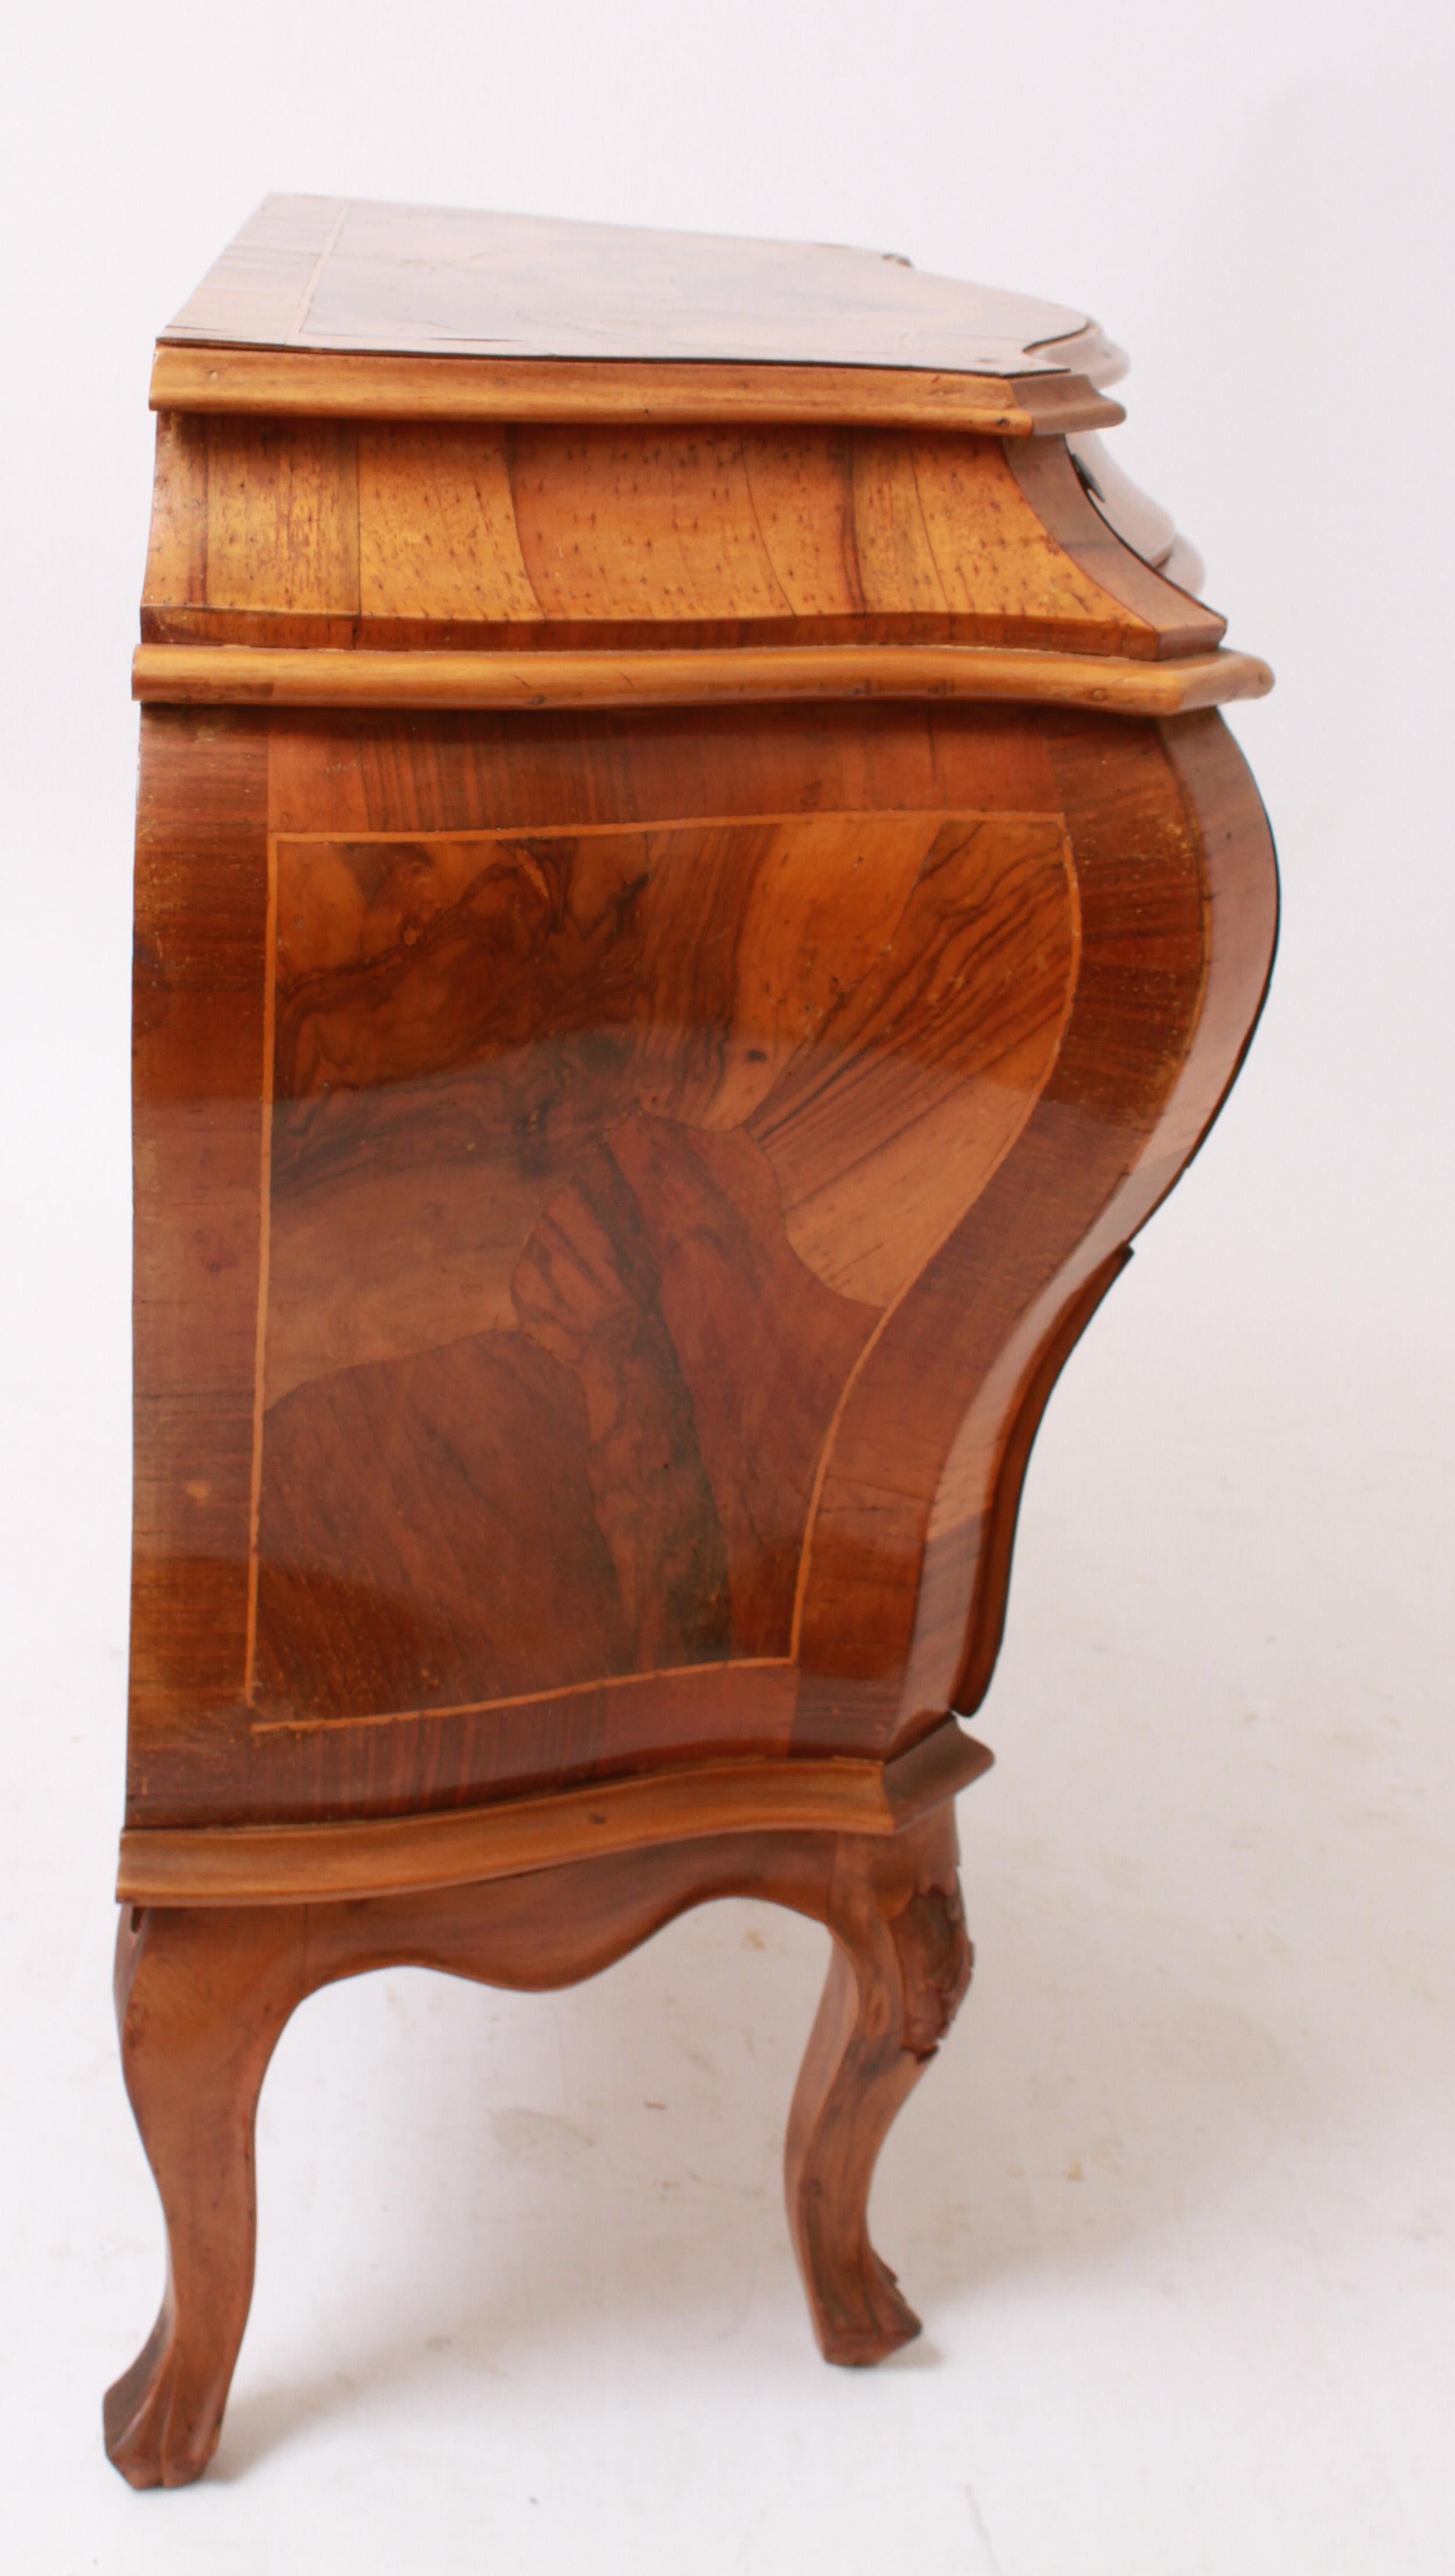 Italian Baroque Revival style burl wood veneer bombé commode, serpentine top over three conforming drawers, raised on four carved cabriole legs, 